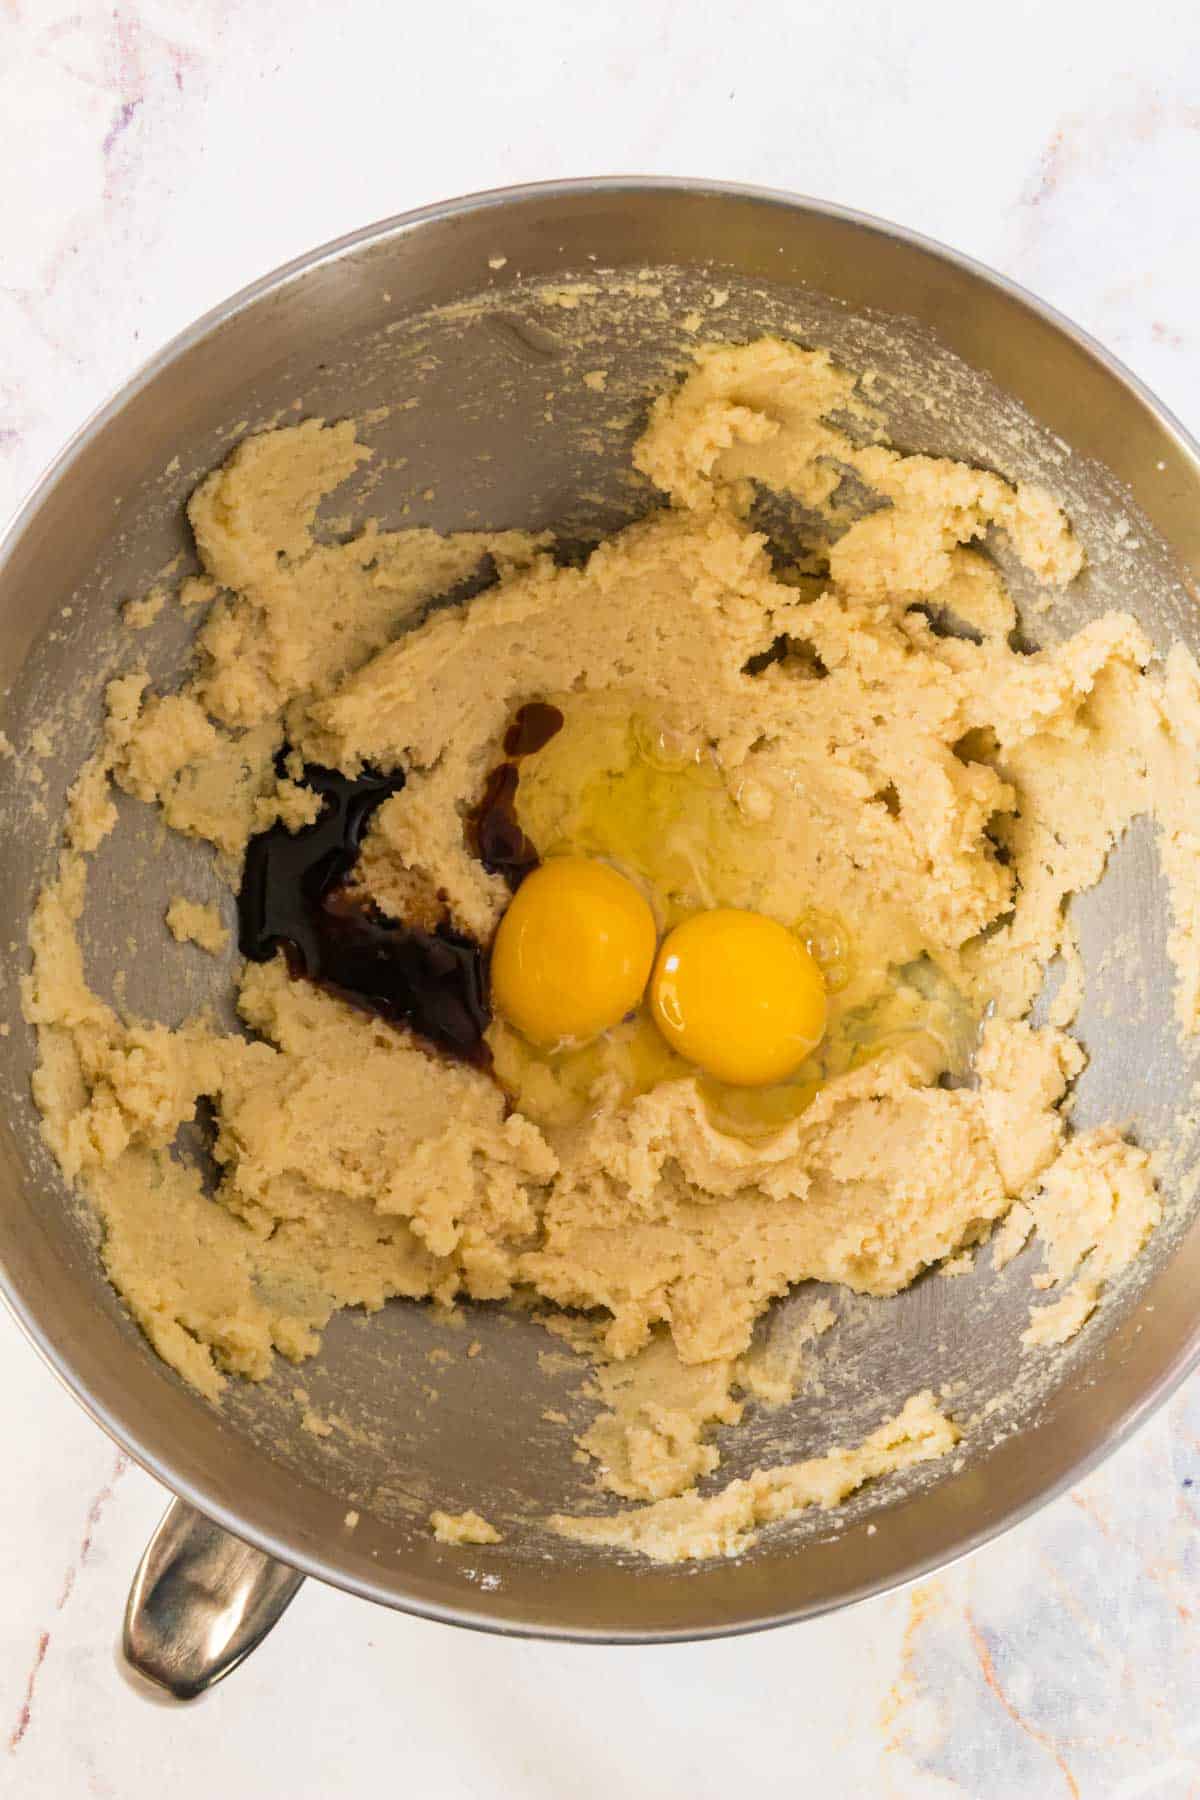 Eggs are added into the butter and sugar for cookie dough.